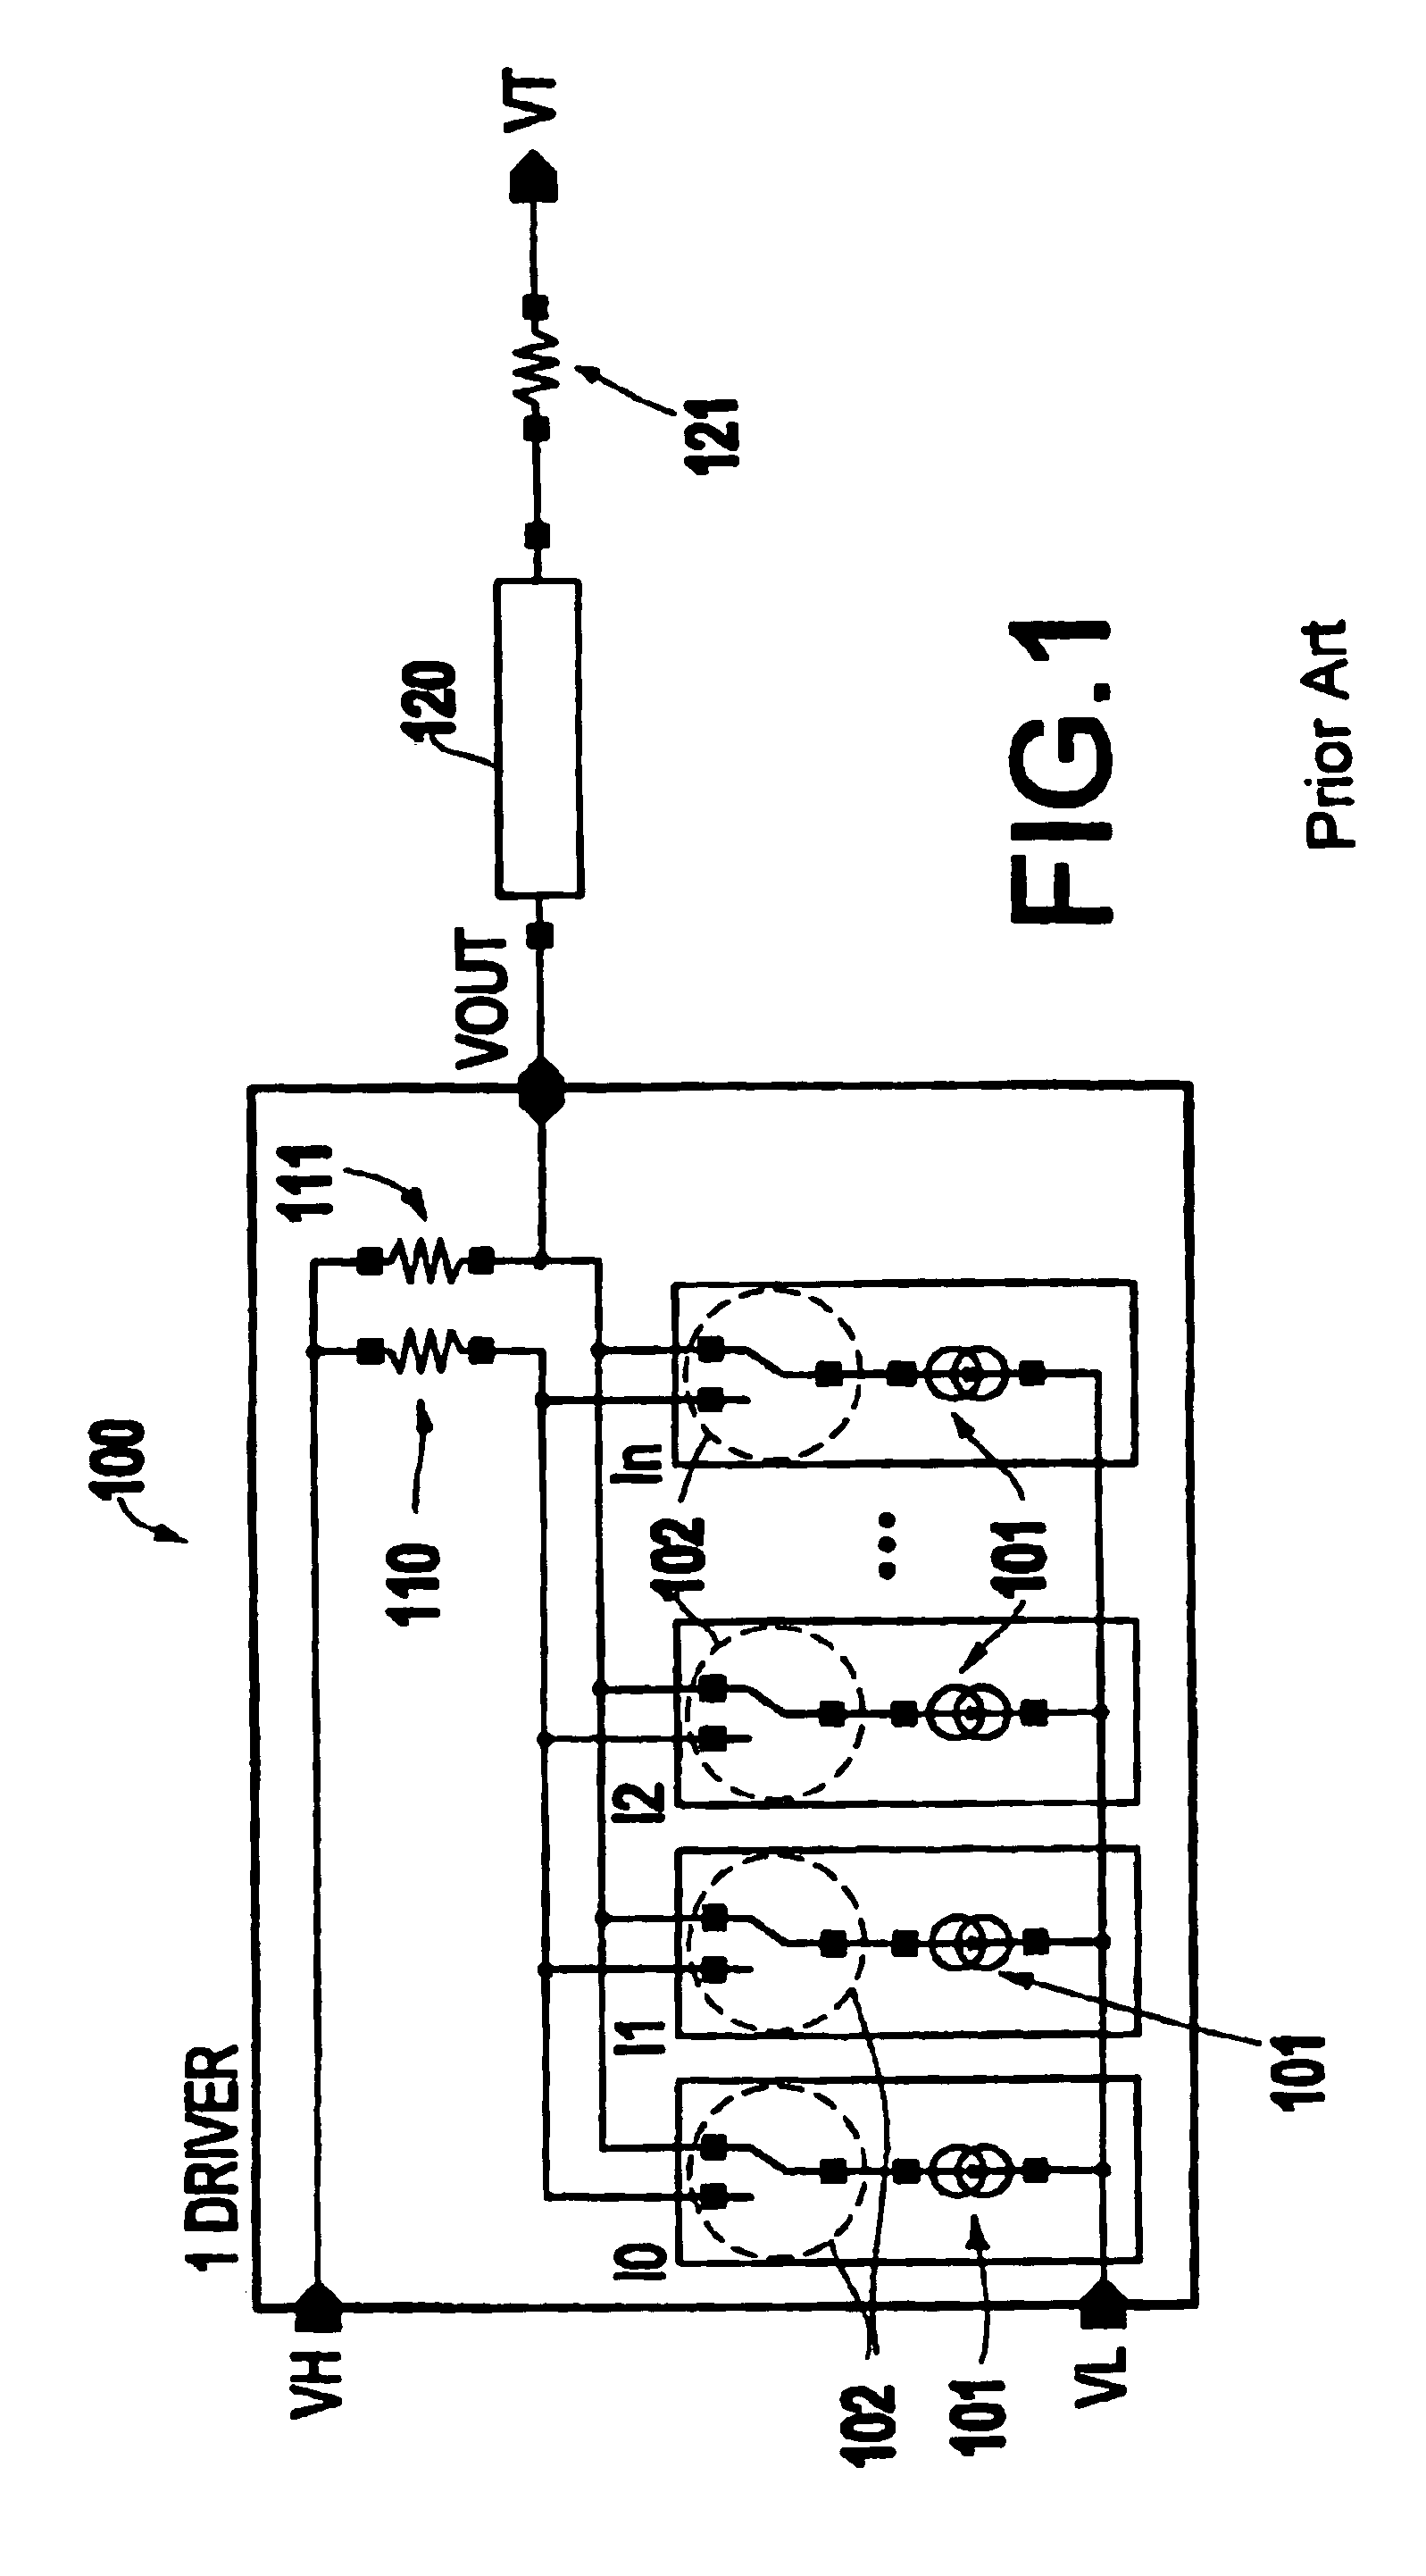 Terminating resistor driver for high speed data communication